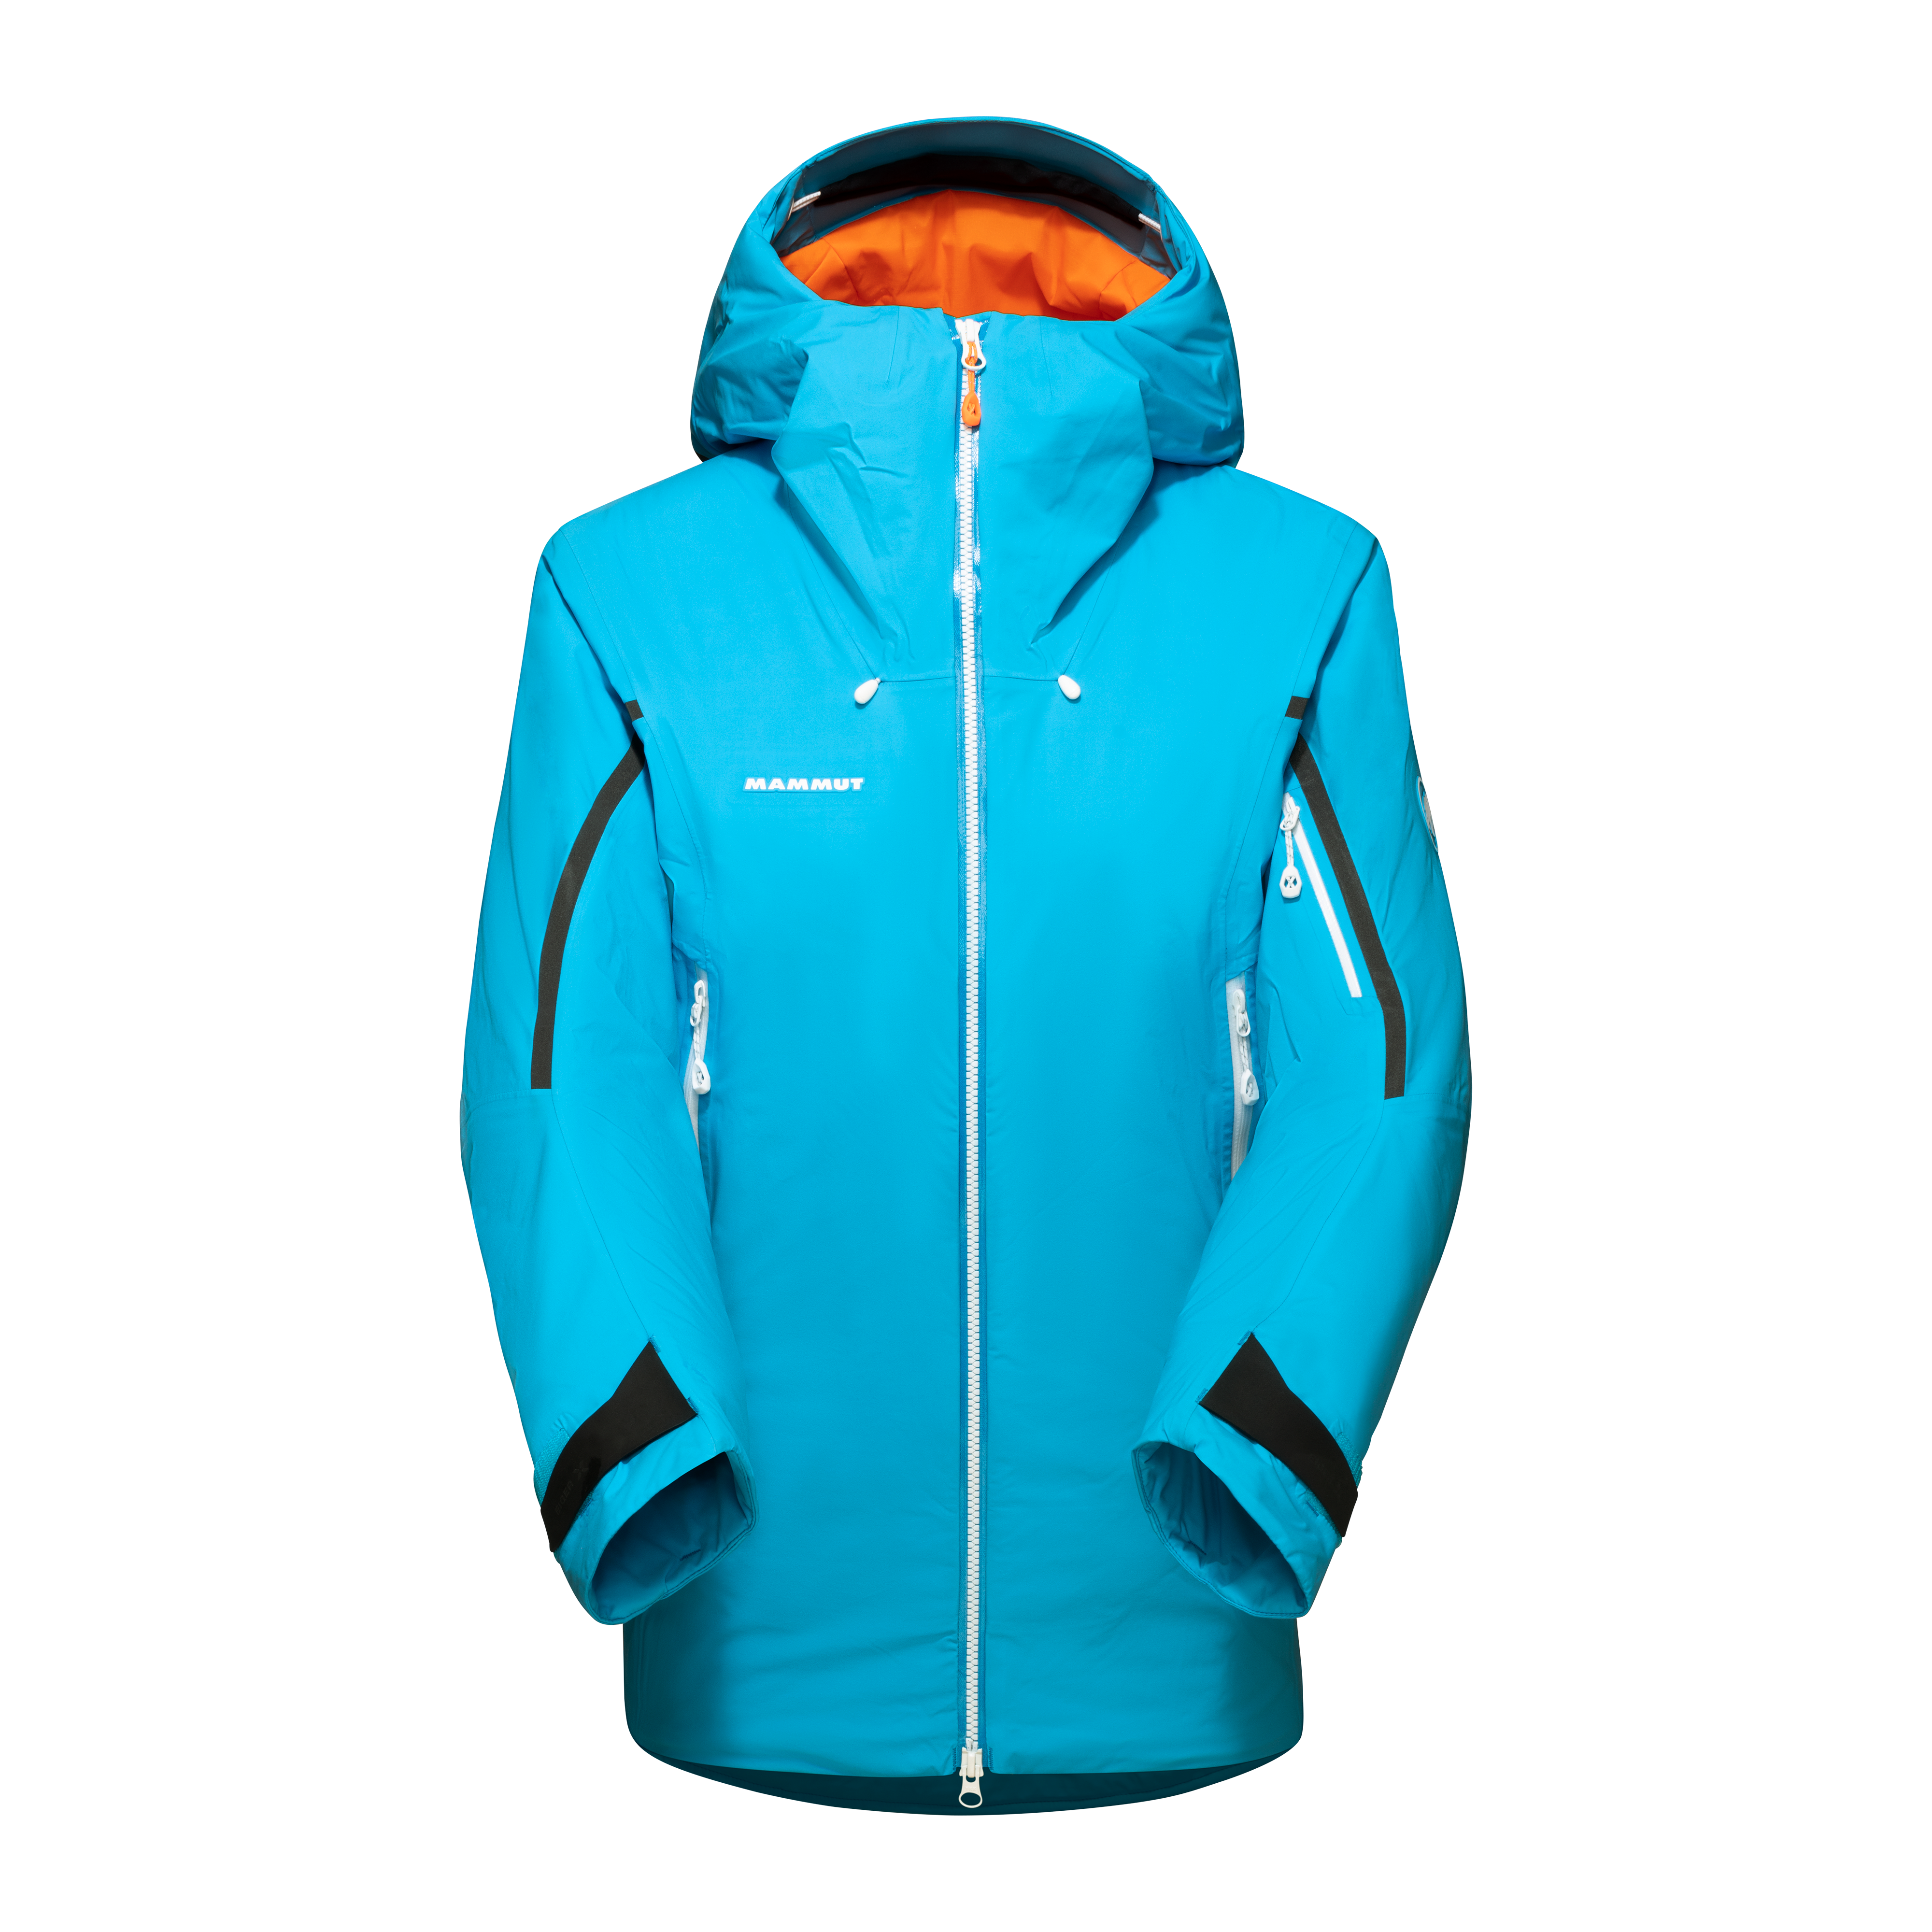 Nordwand Thermo HS Hooded Jacket Women - sky, XS thumbnail